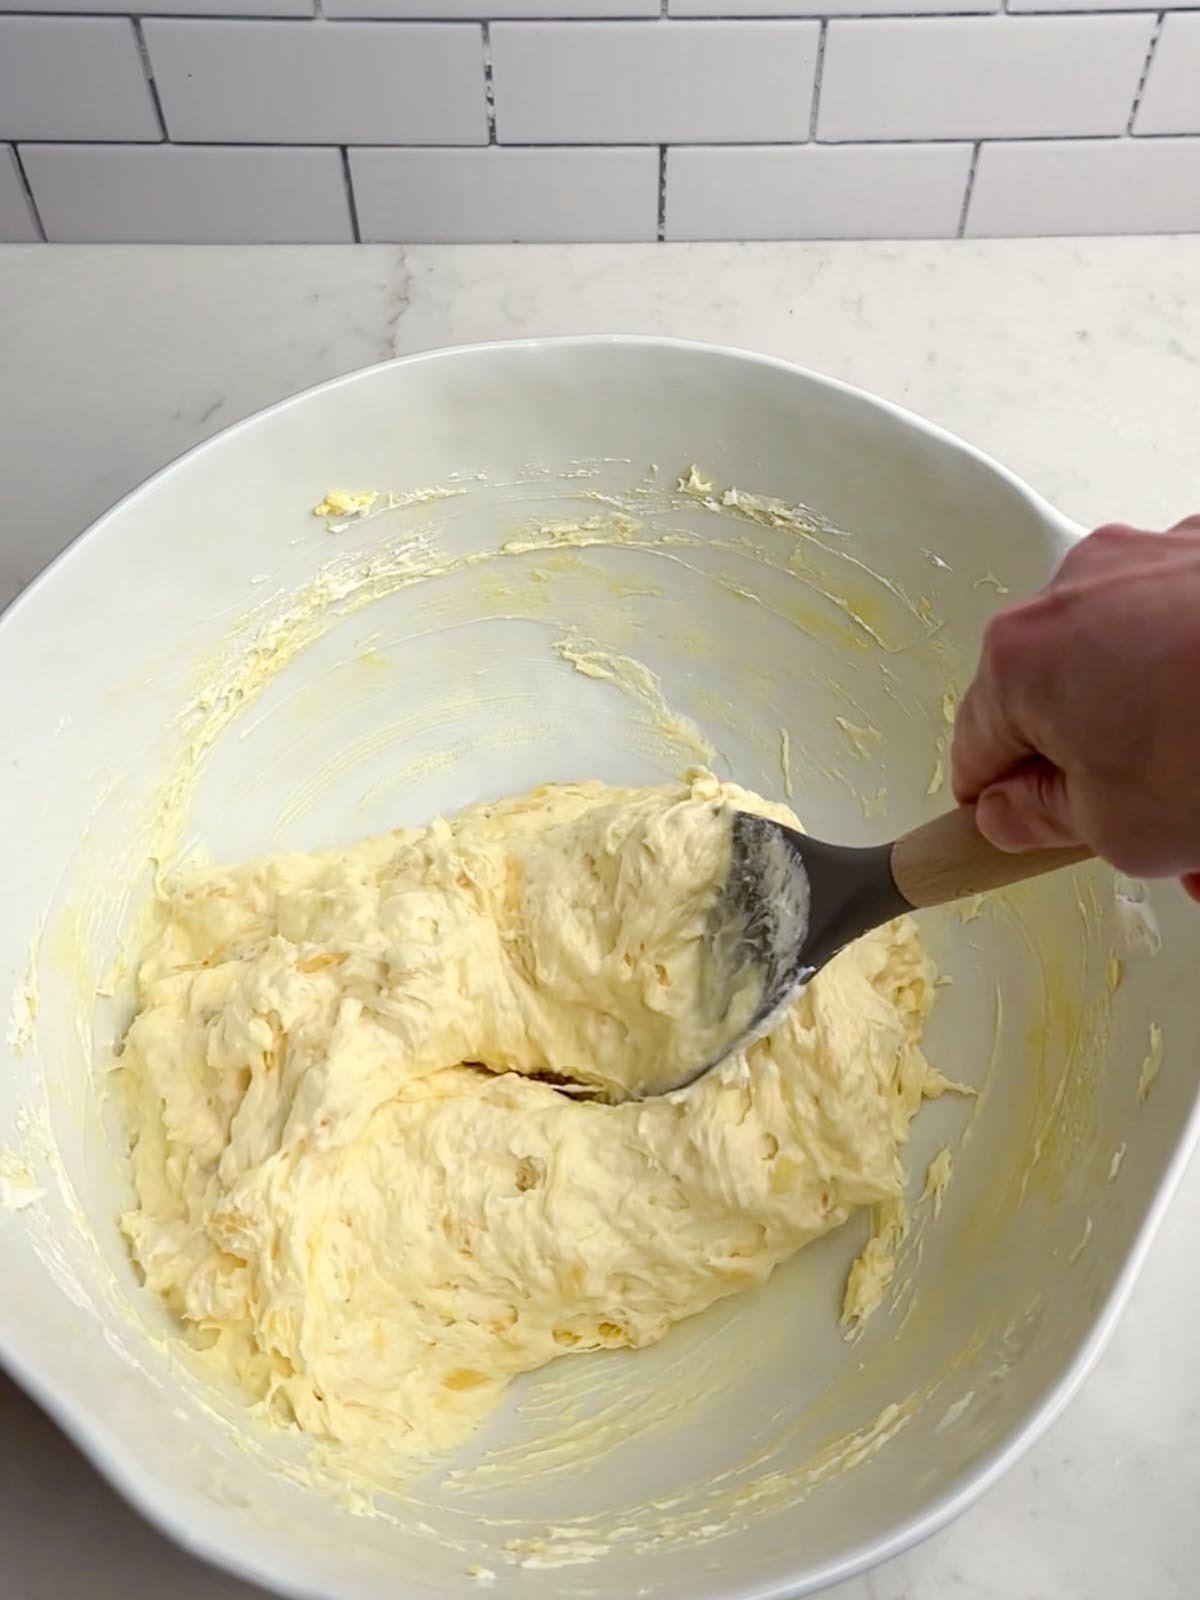 hand holding a spatula folding Cool Whip into the pineapple mixture in a white bowl